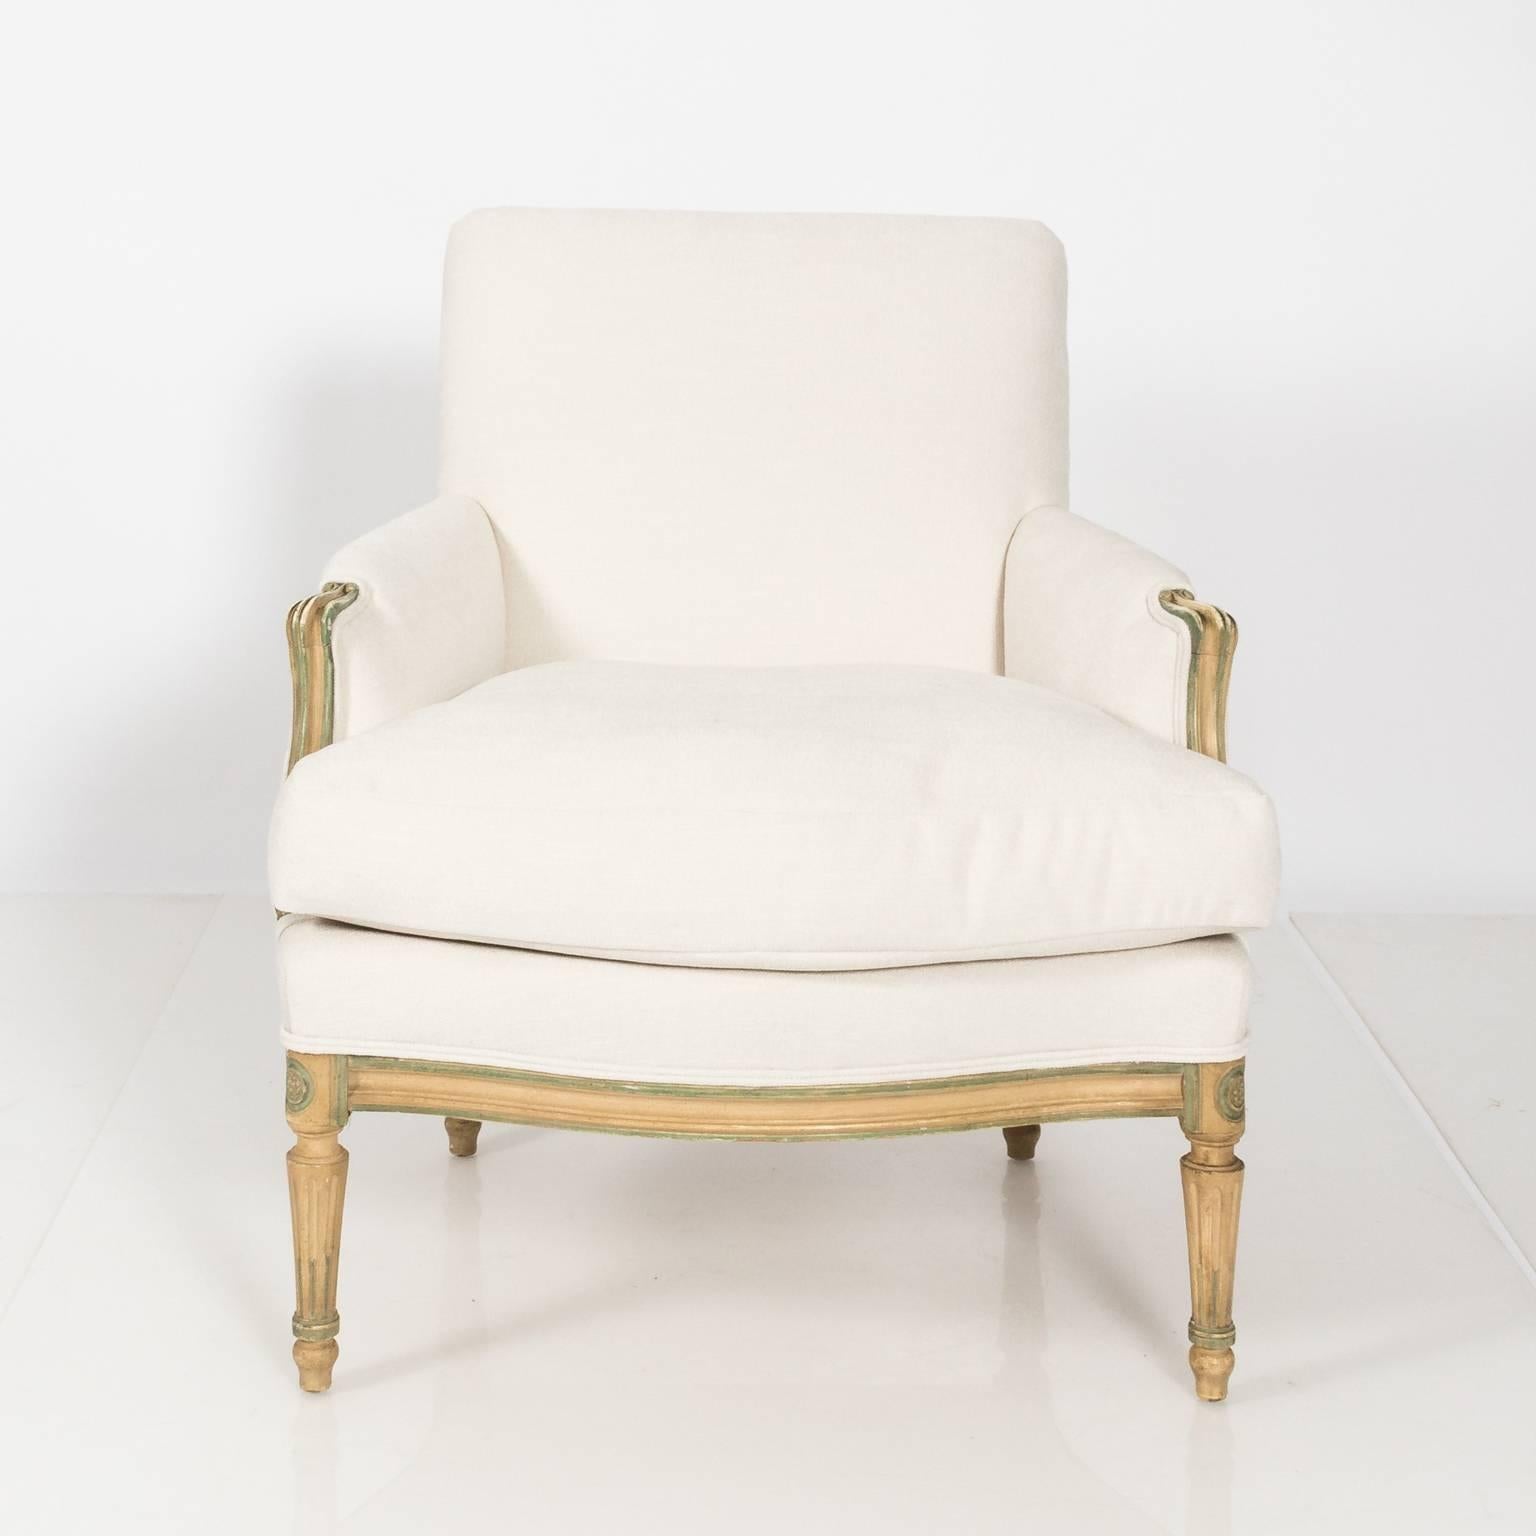 Pair of Louis XVI bergere chairs freshly upholstered in a white linen blend fabric with feather down cushions, circa 1930.
 